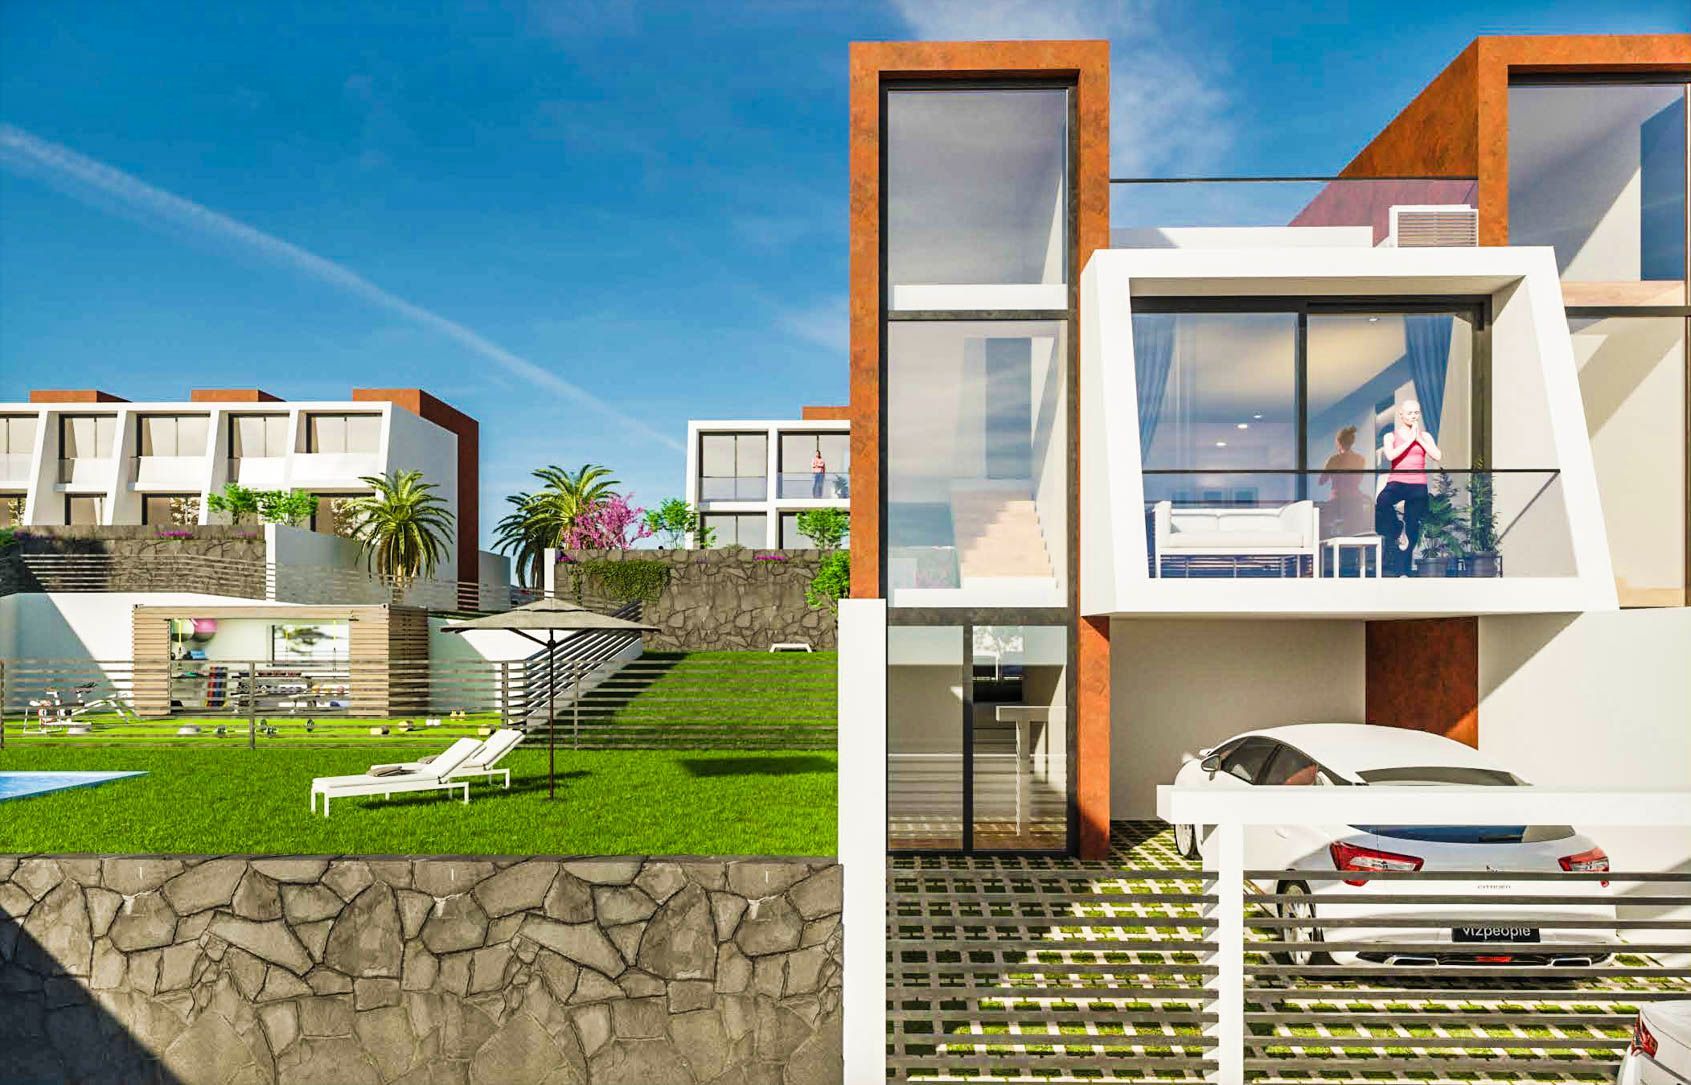 SEMI-DETACHED VILLAS IN PRIVATE URBANISATION WITH SWIMMING POOL AND PADDLE TENNIS COURT